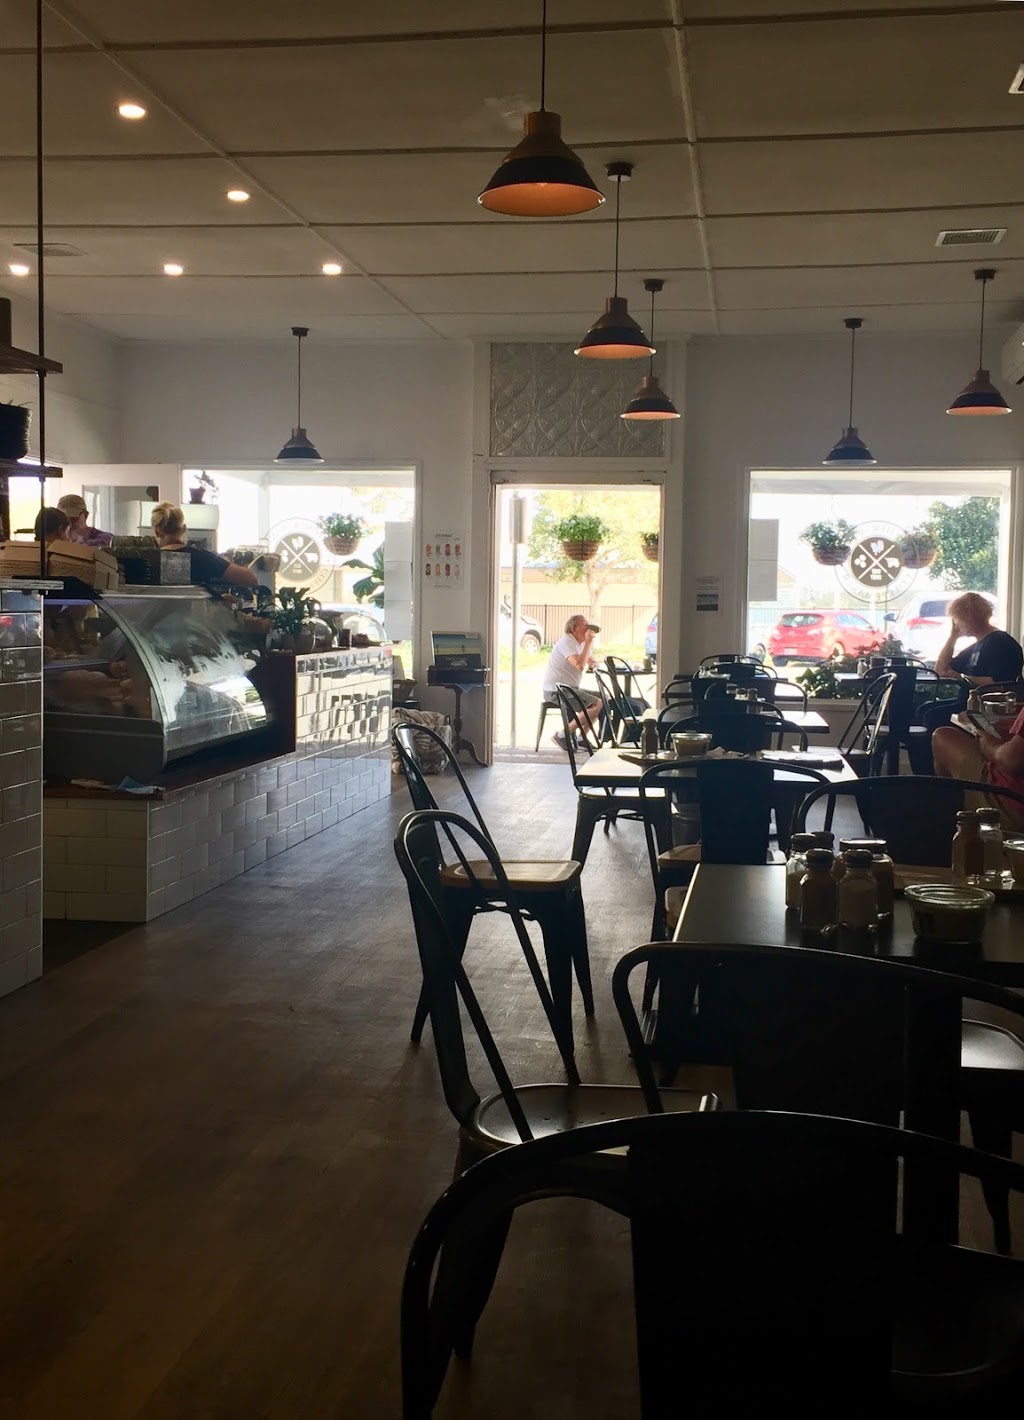 Butcher Baker Coffeemaker | cafe | 40 Oxley Ave, Woody Point QLD 4019, Australia | 0405117718 OR +61 405 117 718